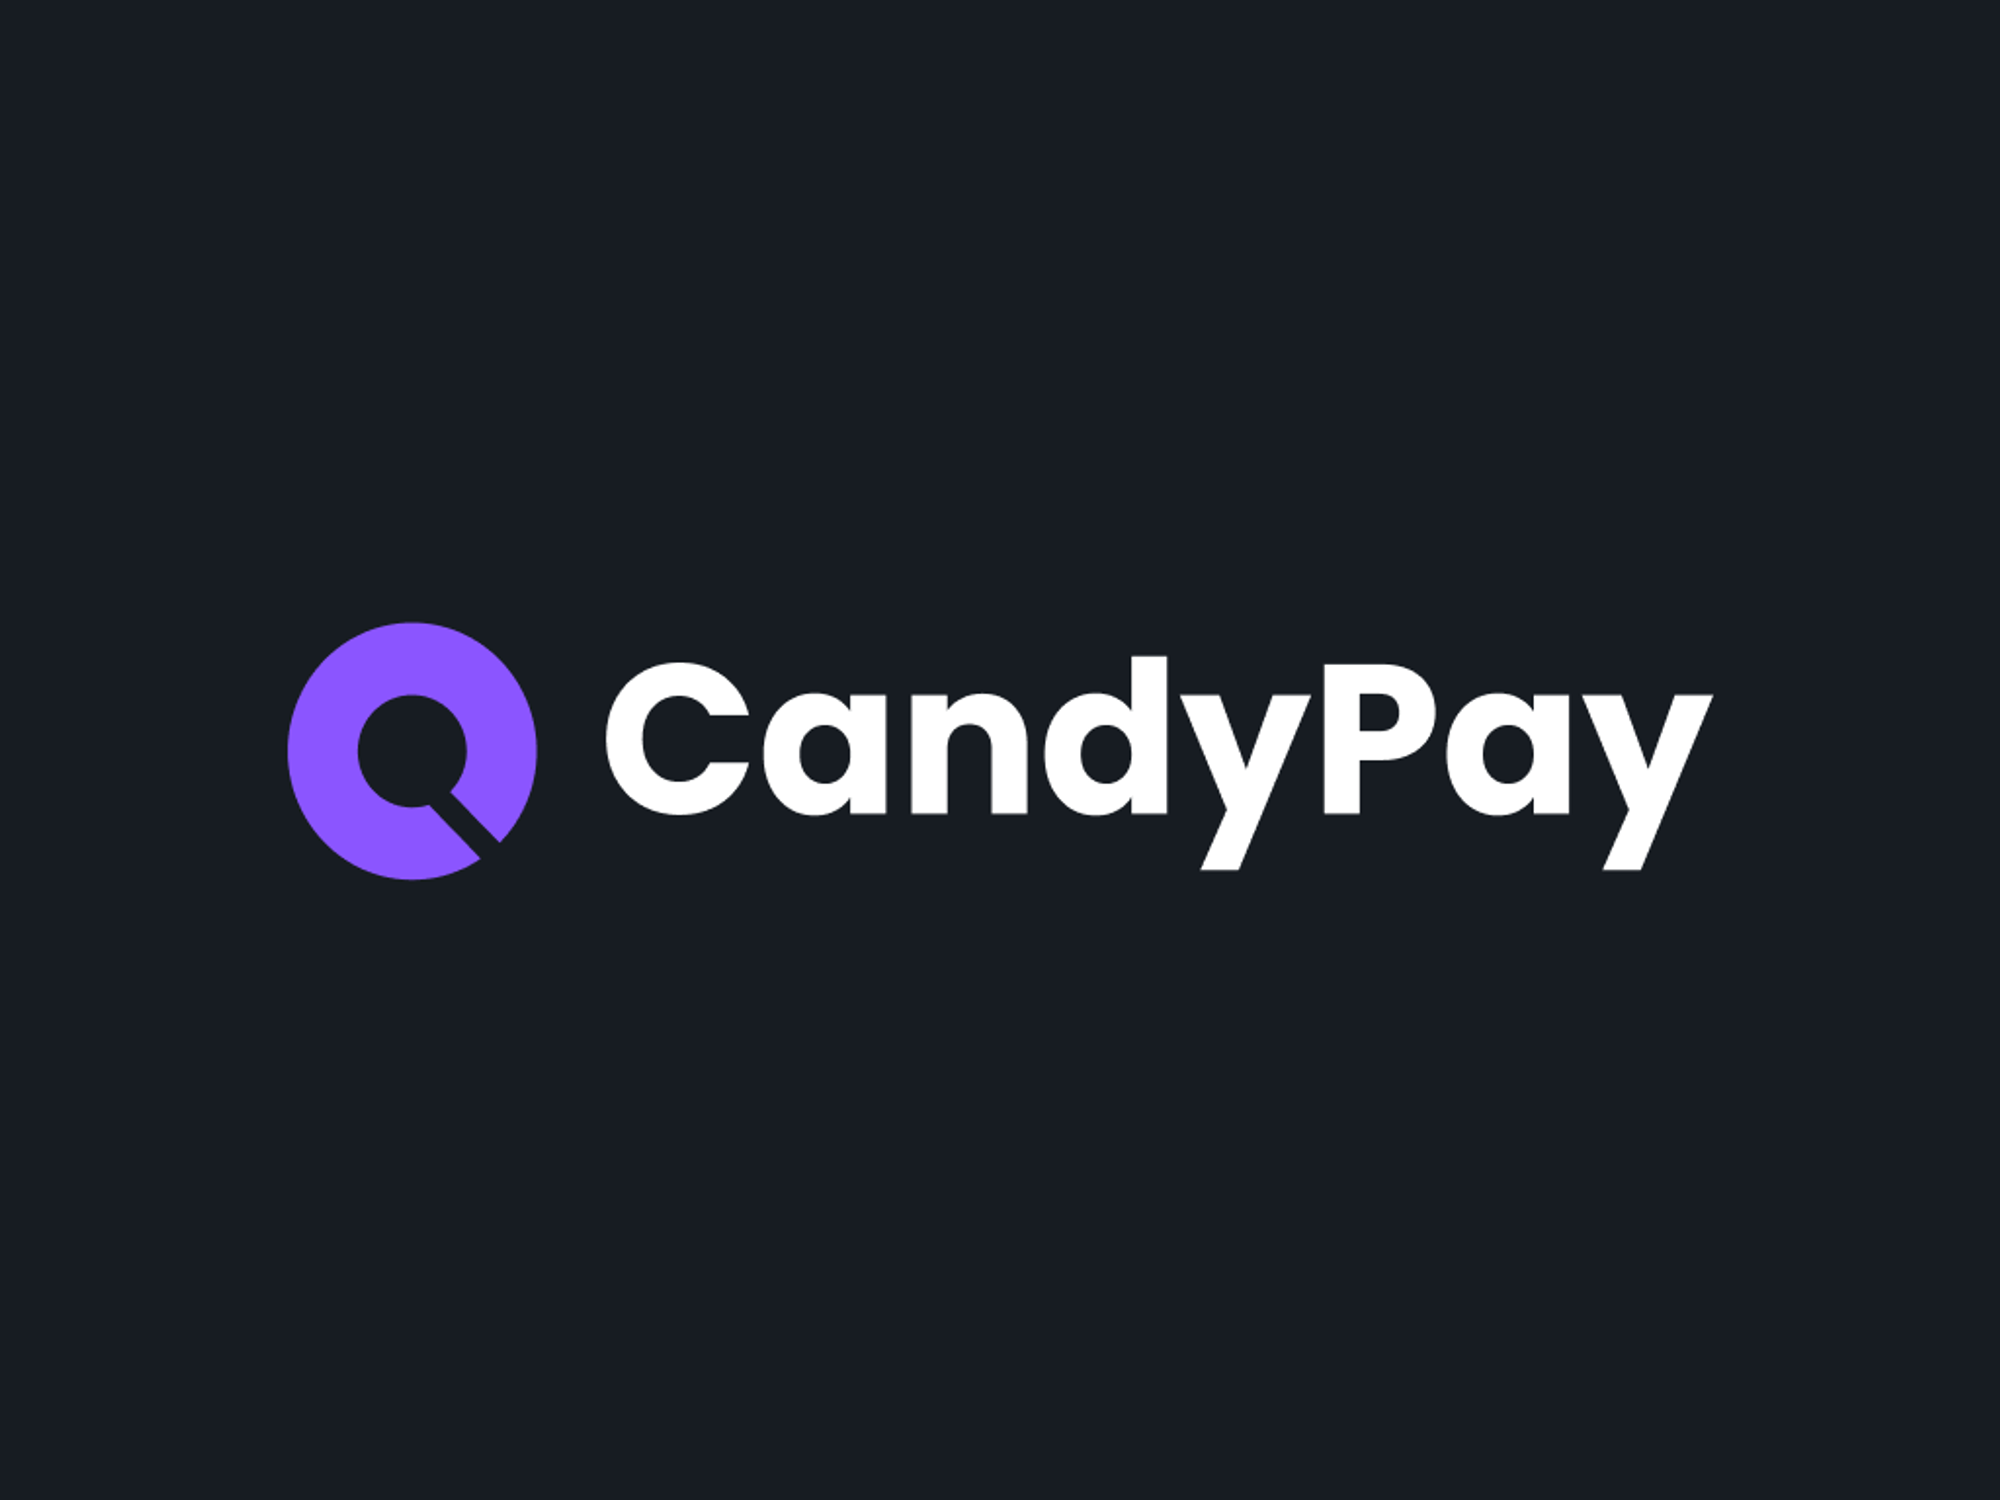 CandyPay